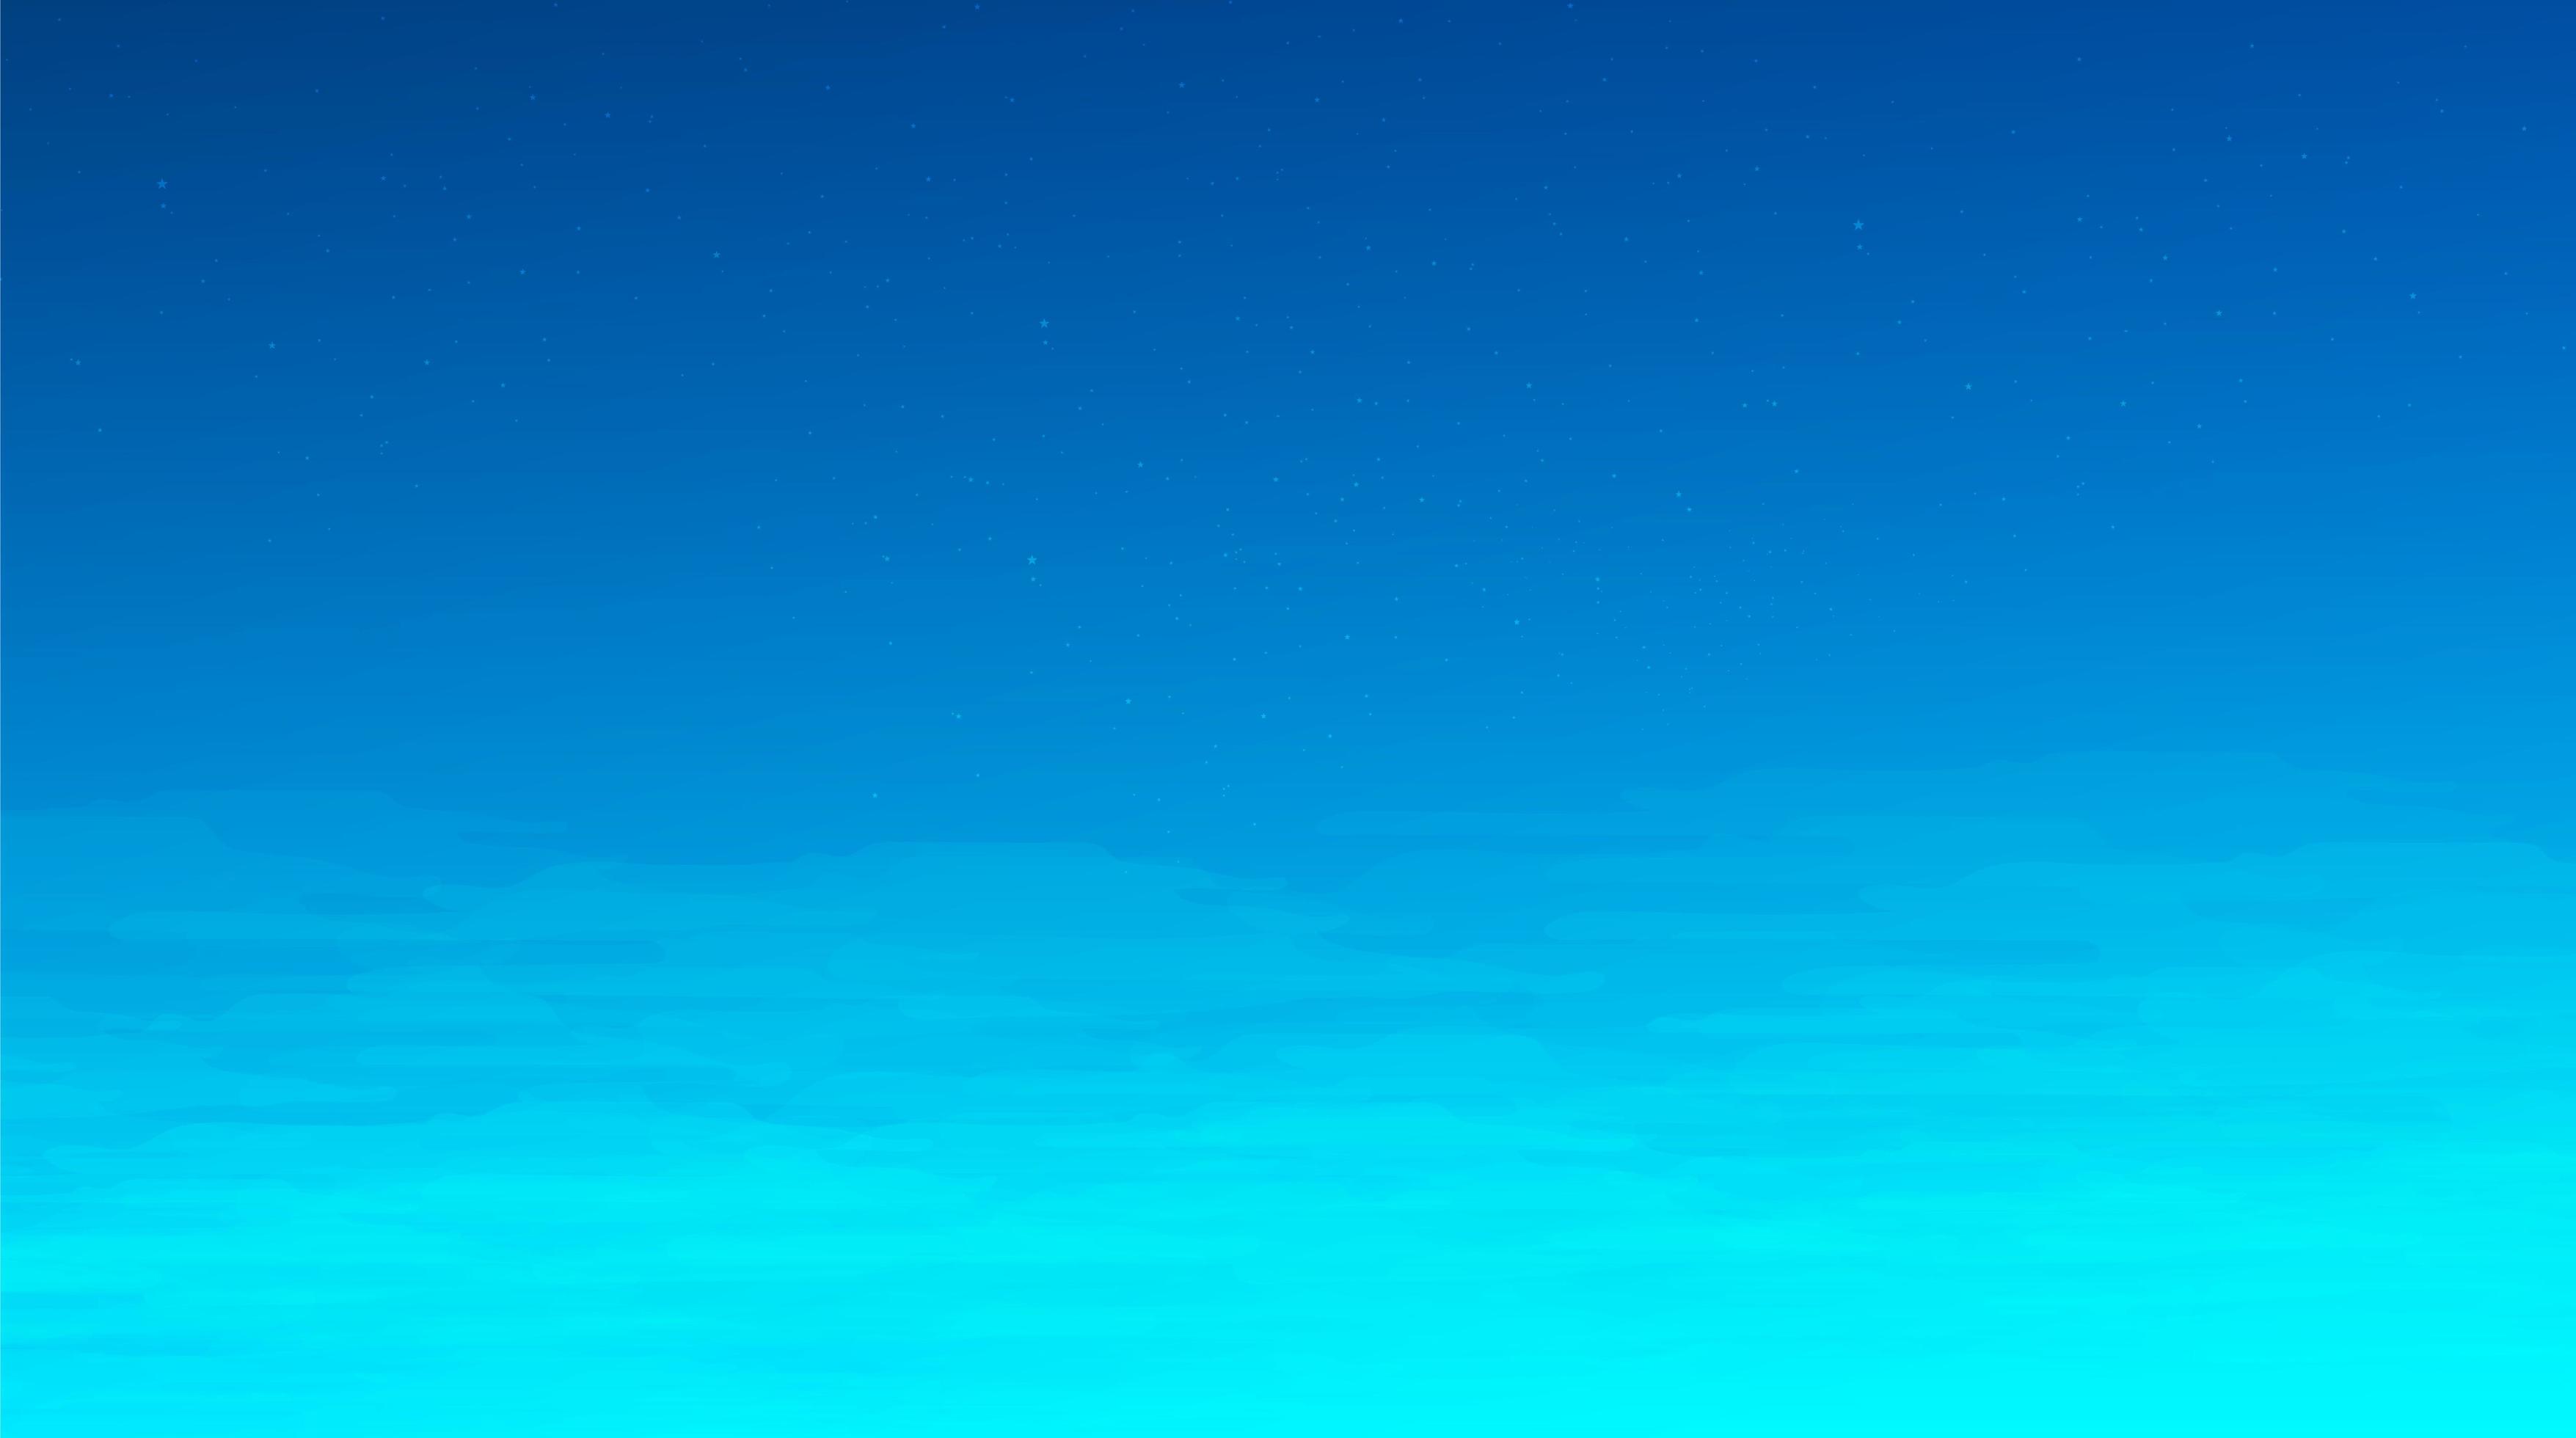 Blue Sky Background 2207511 - Download Free Vectors, Clipart Graphics